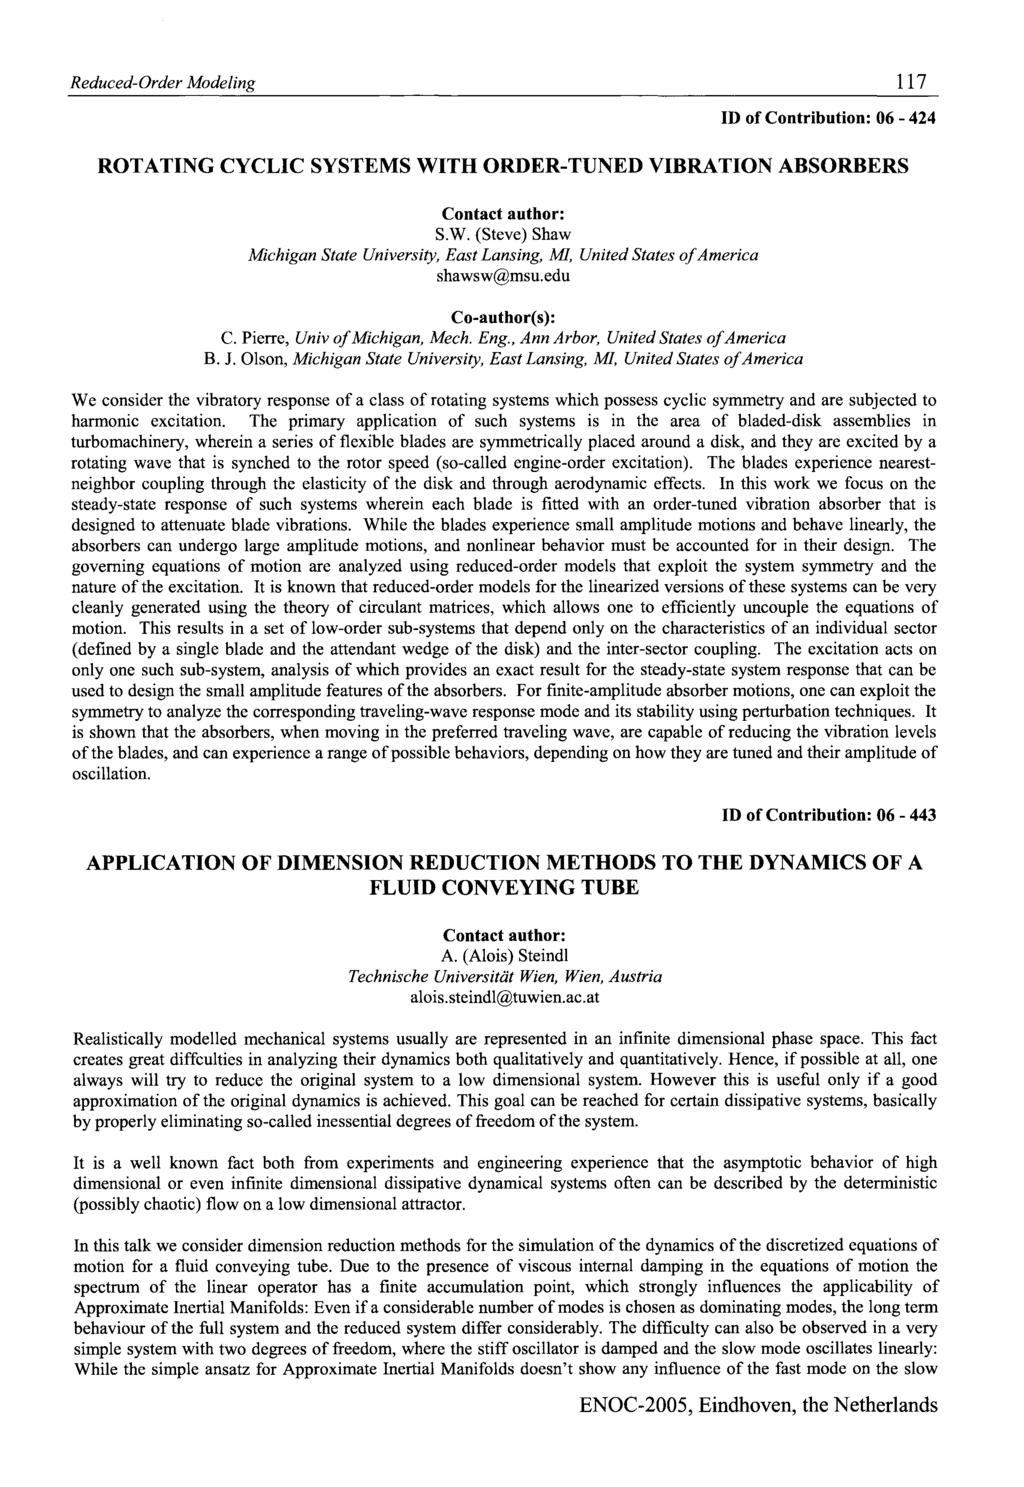 Reduced-Order Modeling 117 ID of Contribution: 06-424 ROTATING CYCLIC SYSTEMS WITH ORDER-TUNED VIBRATION ABSORBERS S.W. (Steve) Shaw Michigan State University, East Lansing, MI, United States of America shawsw@msu.